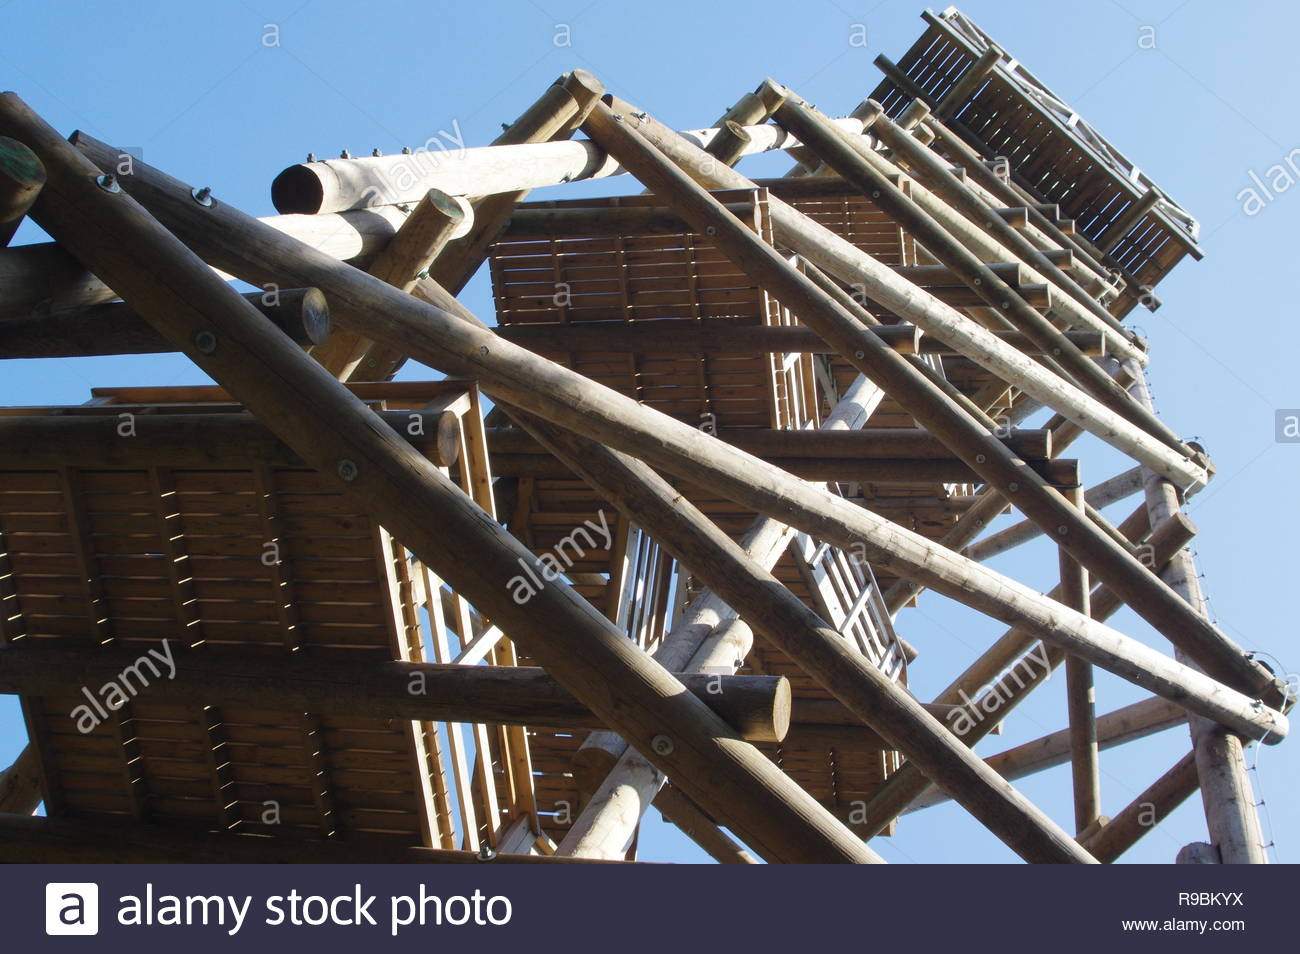 close up view on observation tower construction elements wooden tower in forest R9BKYX